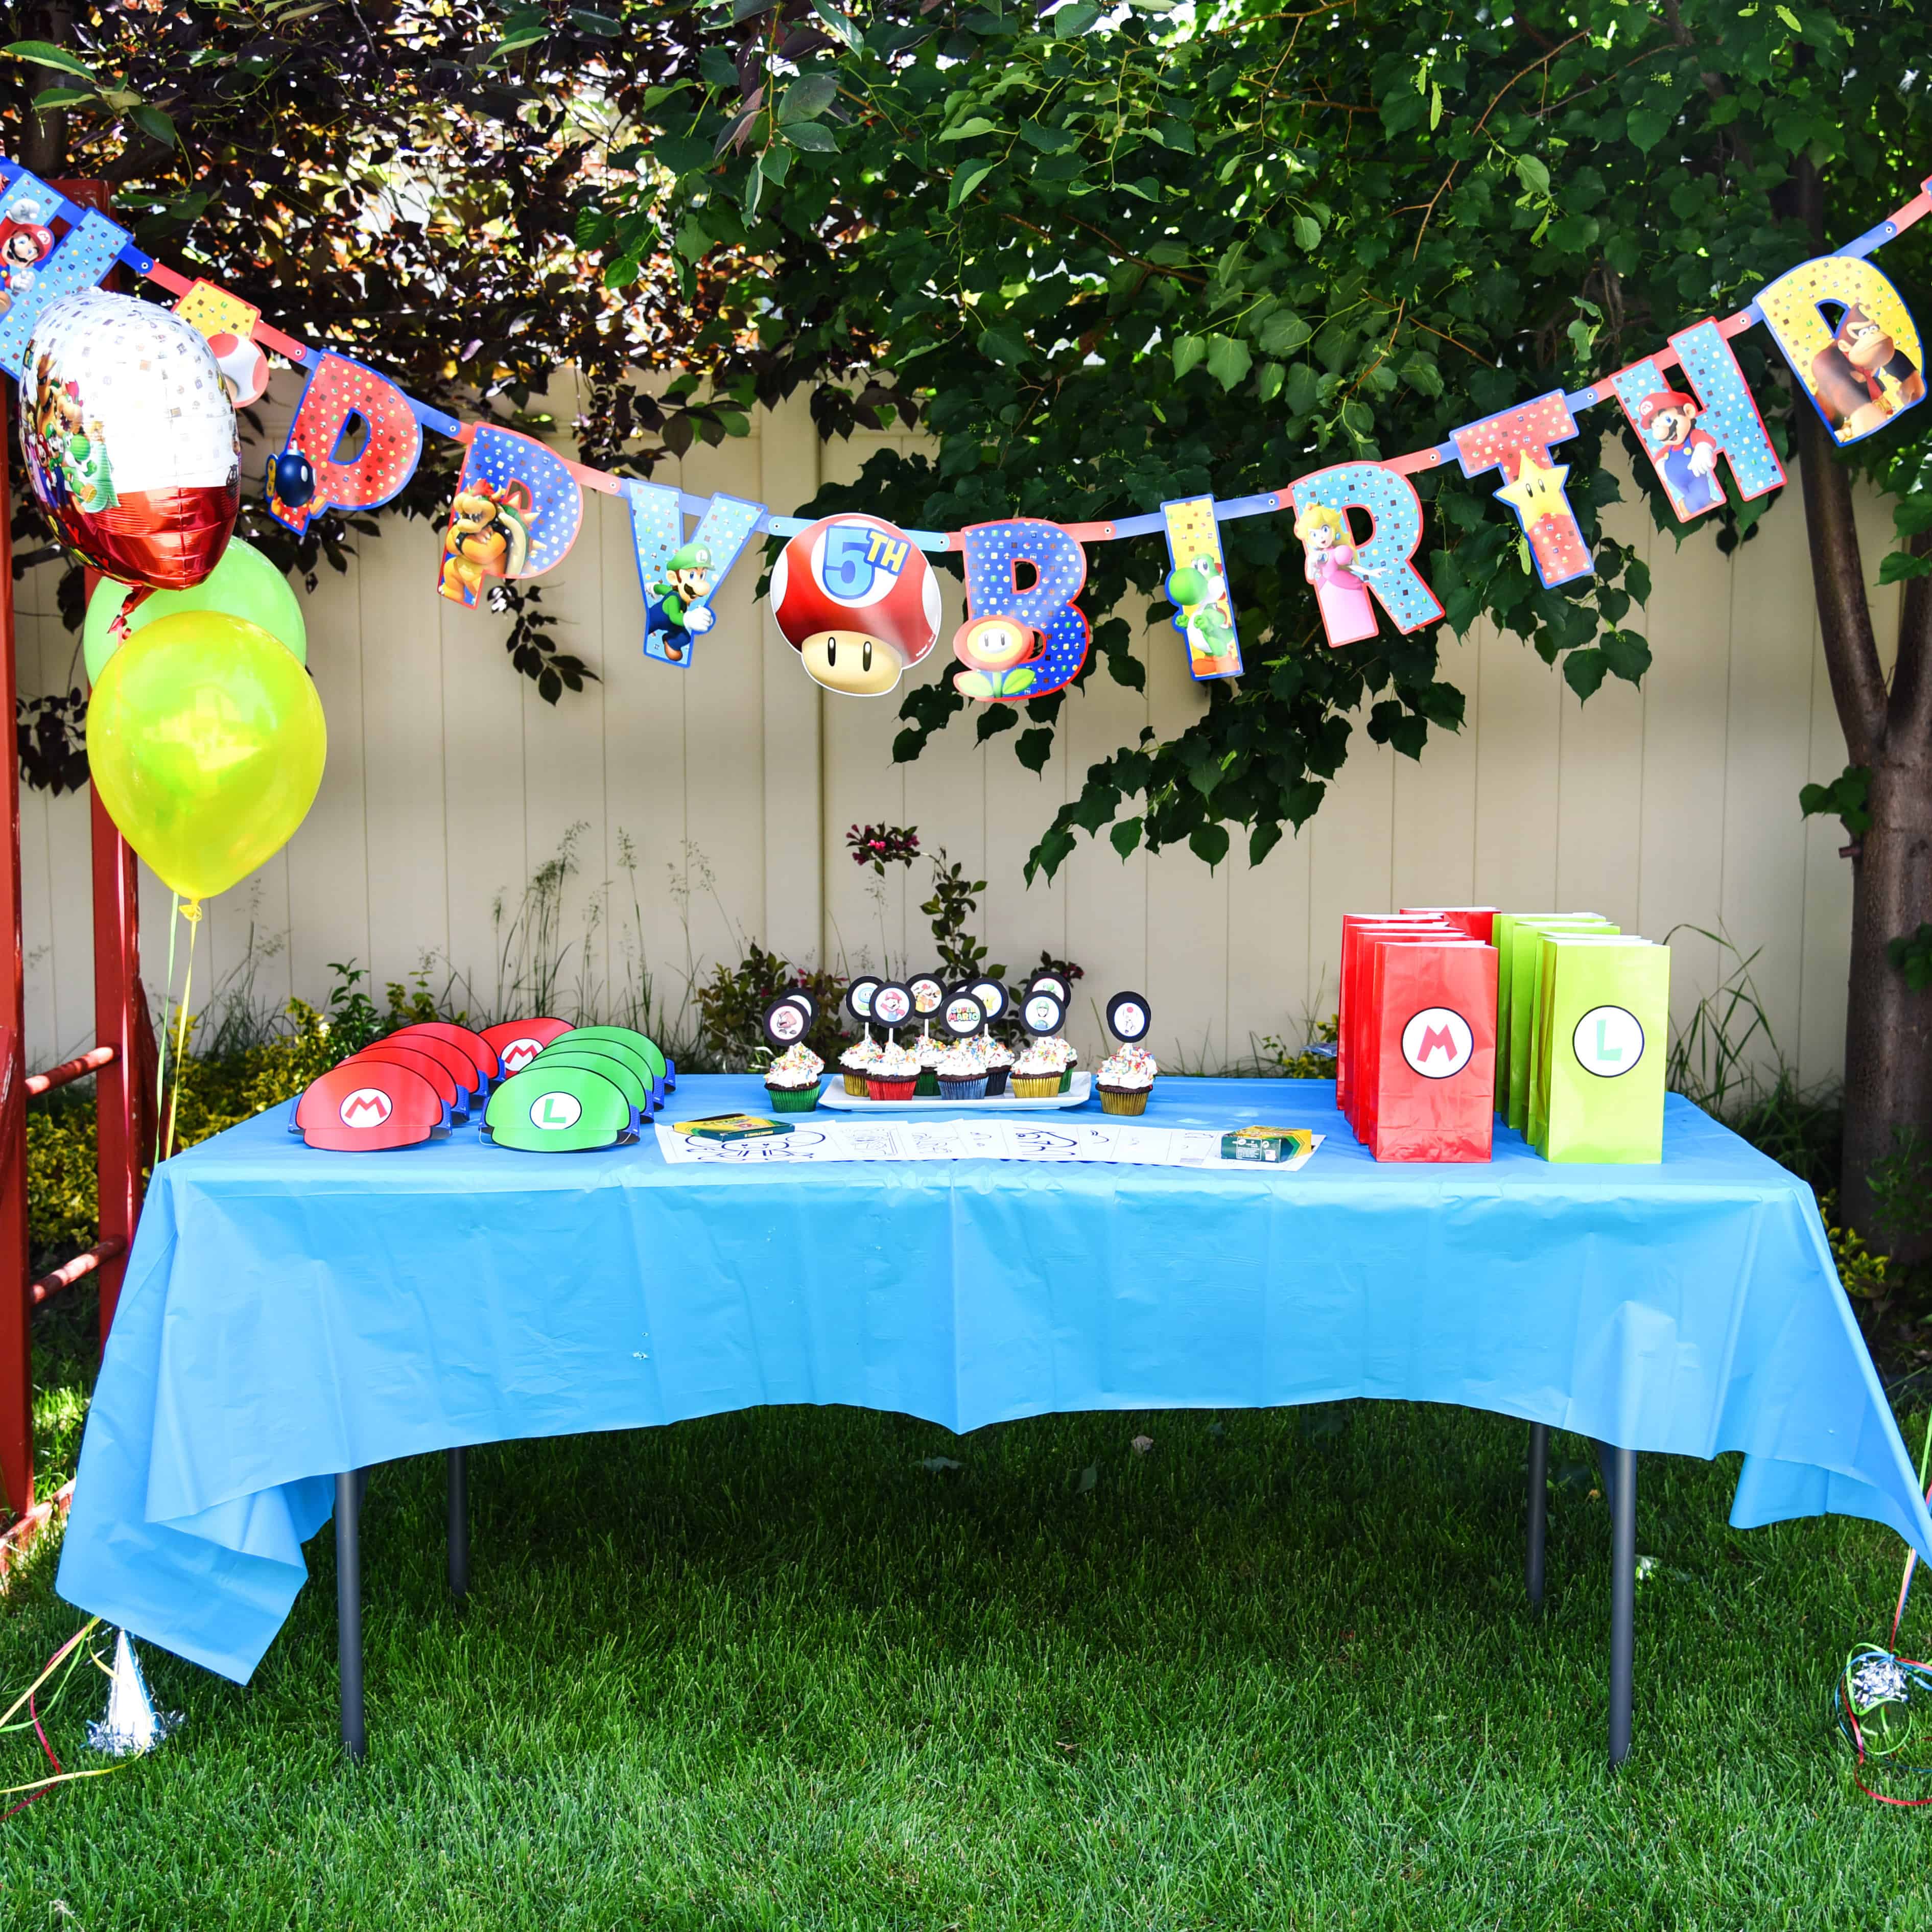 If your kids request a Super Mario Bros. birthday party, look no further for ideas! Everything you need is here in one post, including free printables!